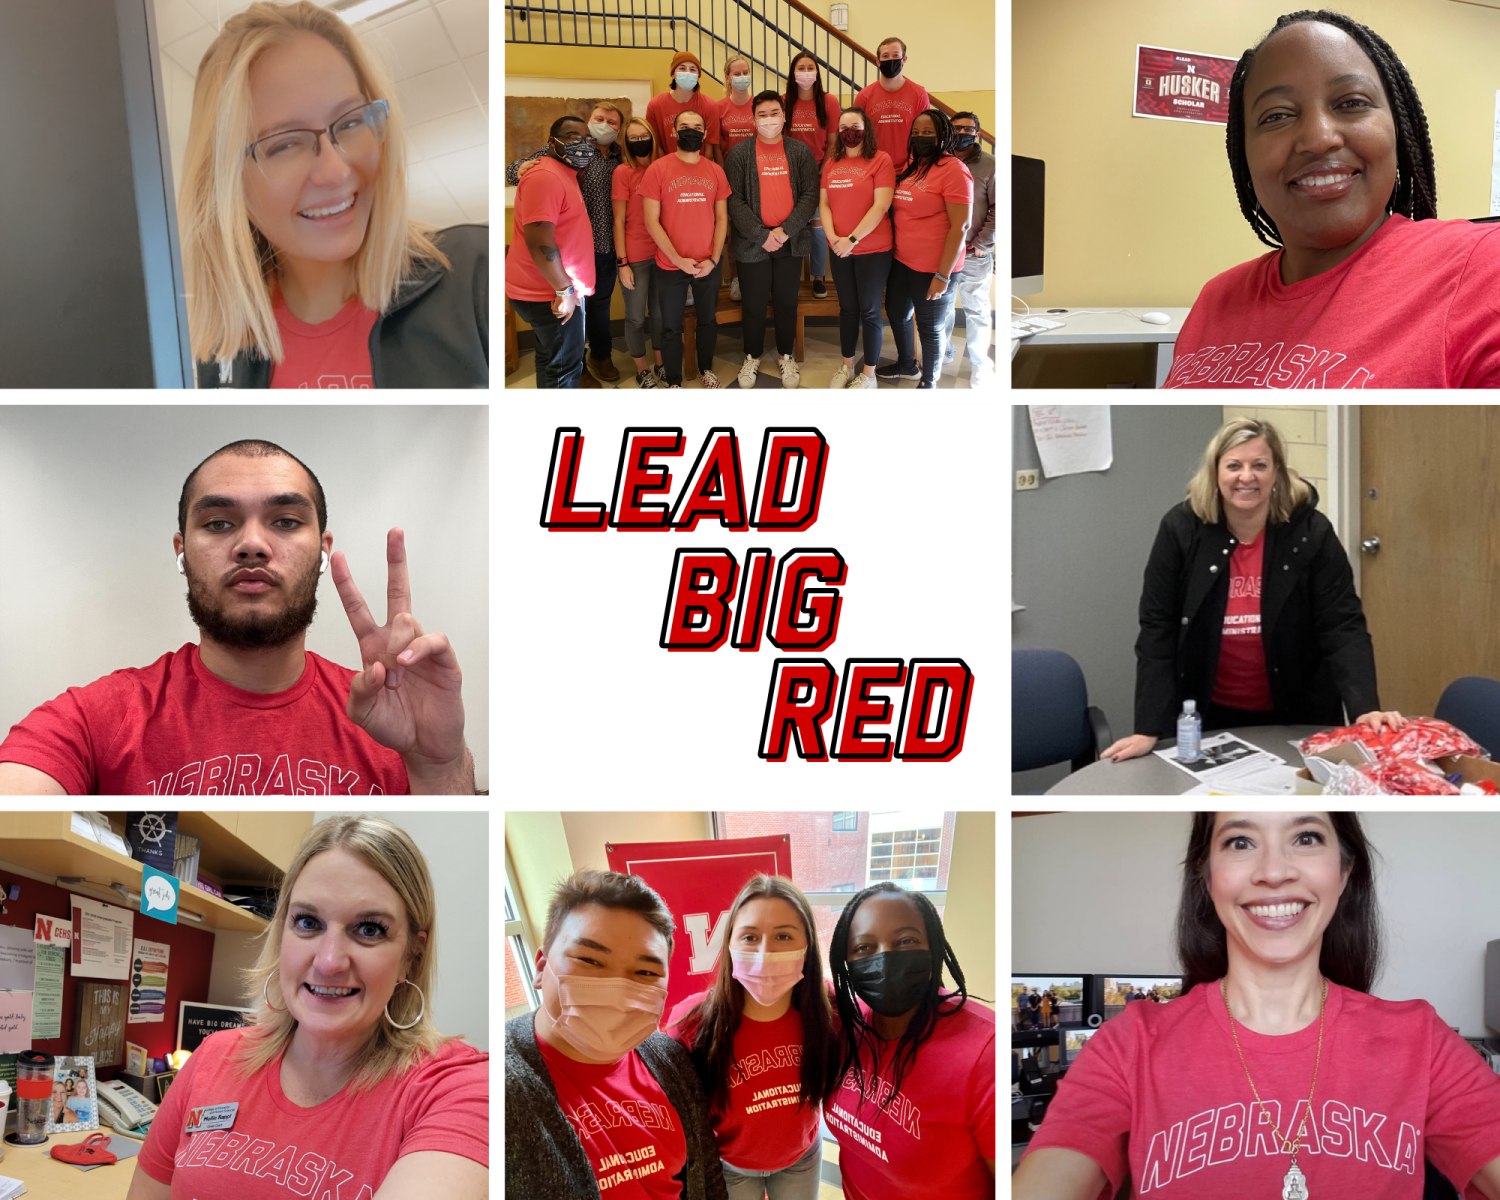 Lead Big Red (redshirt colleague)